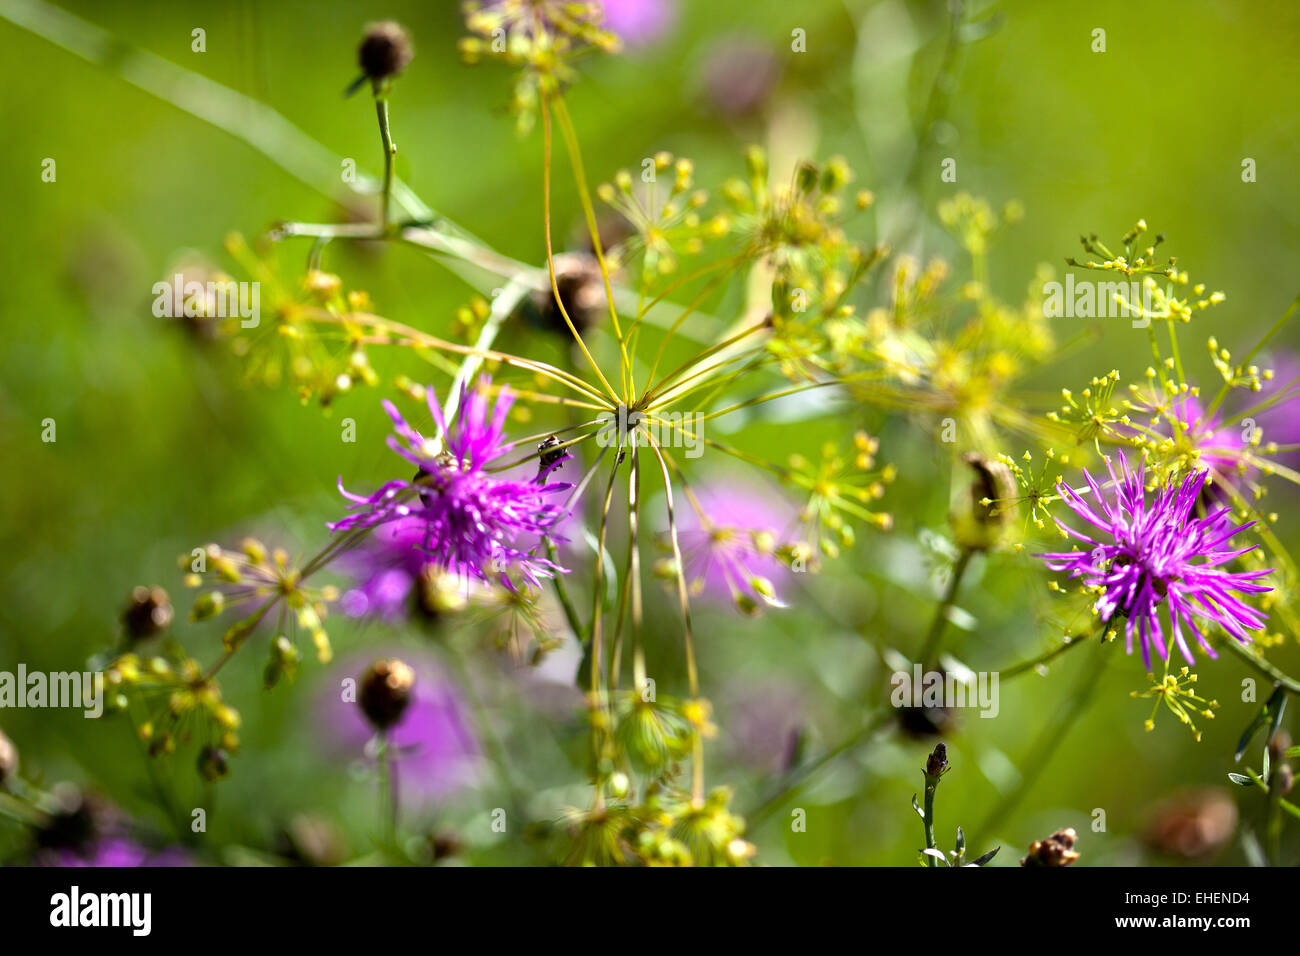 Flowers on Summer Meadow Stock Photo